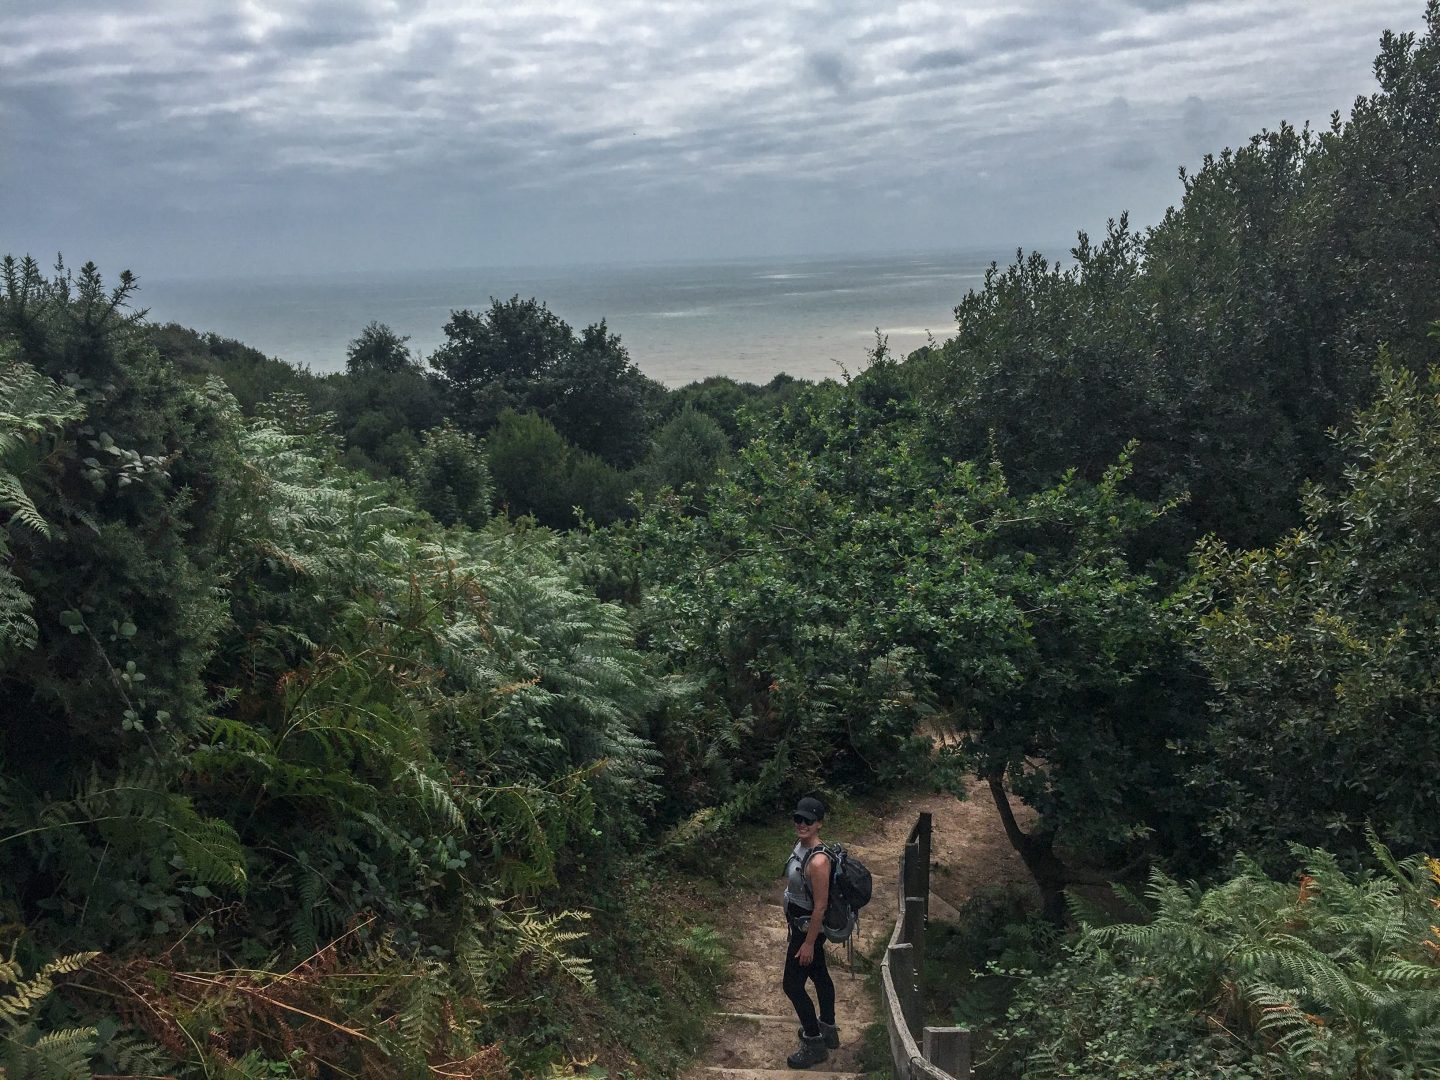 Hiking from Winchelsea to Hastings